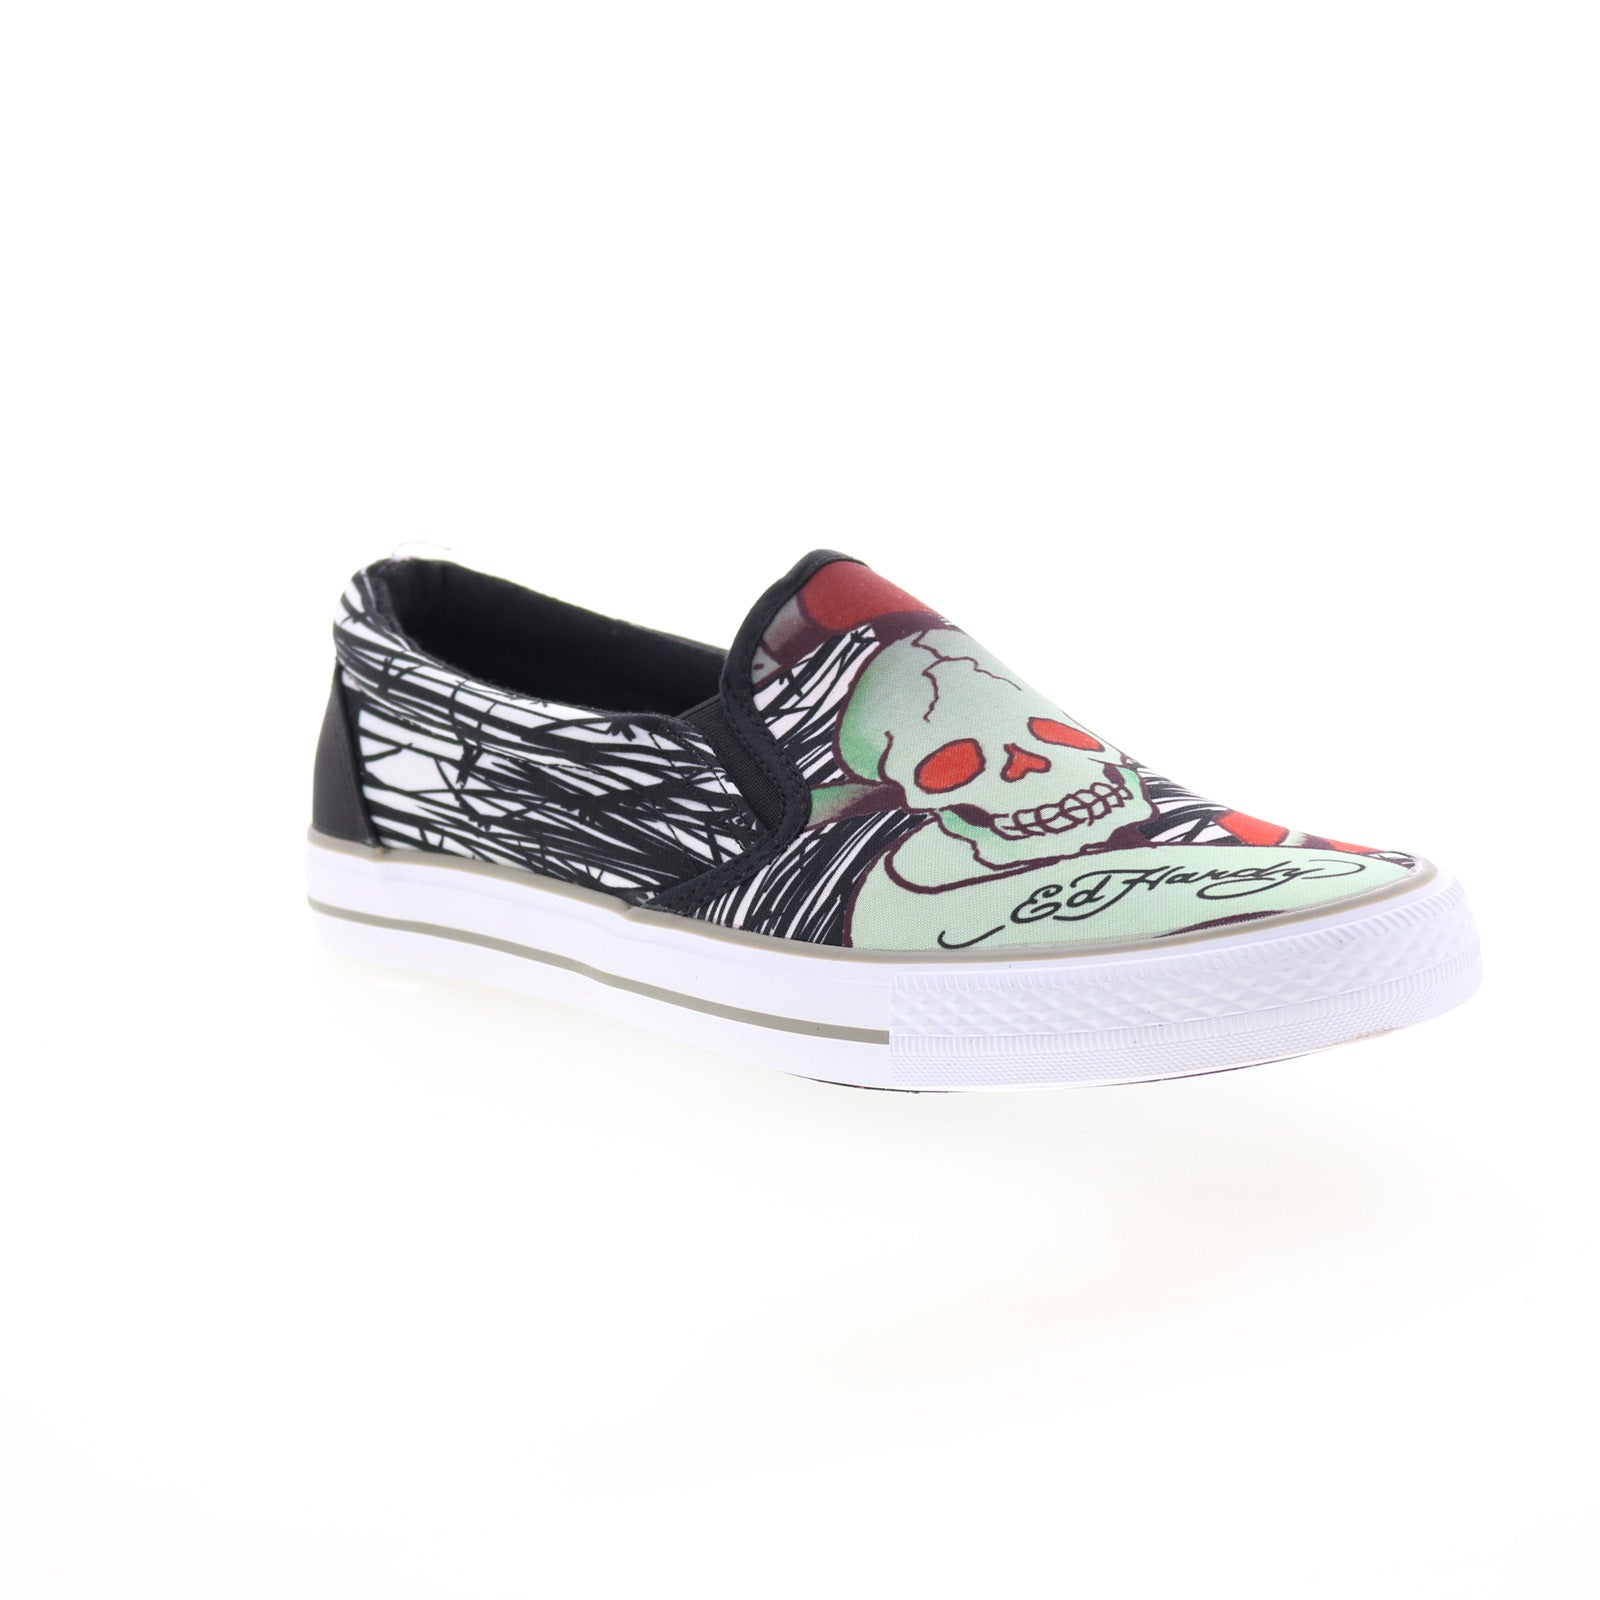 Ed Hardy Wes EH9050S Mens Black Canvas Slip On Lifestyle Sneakers Shoe ...